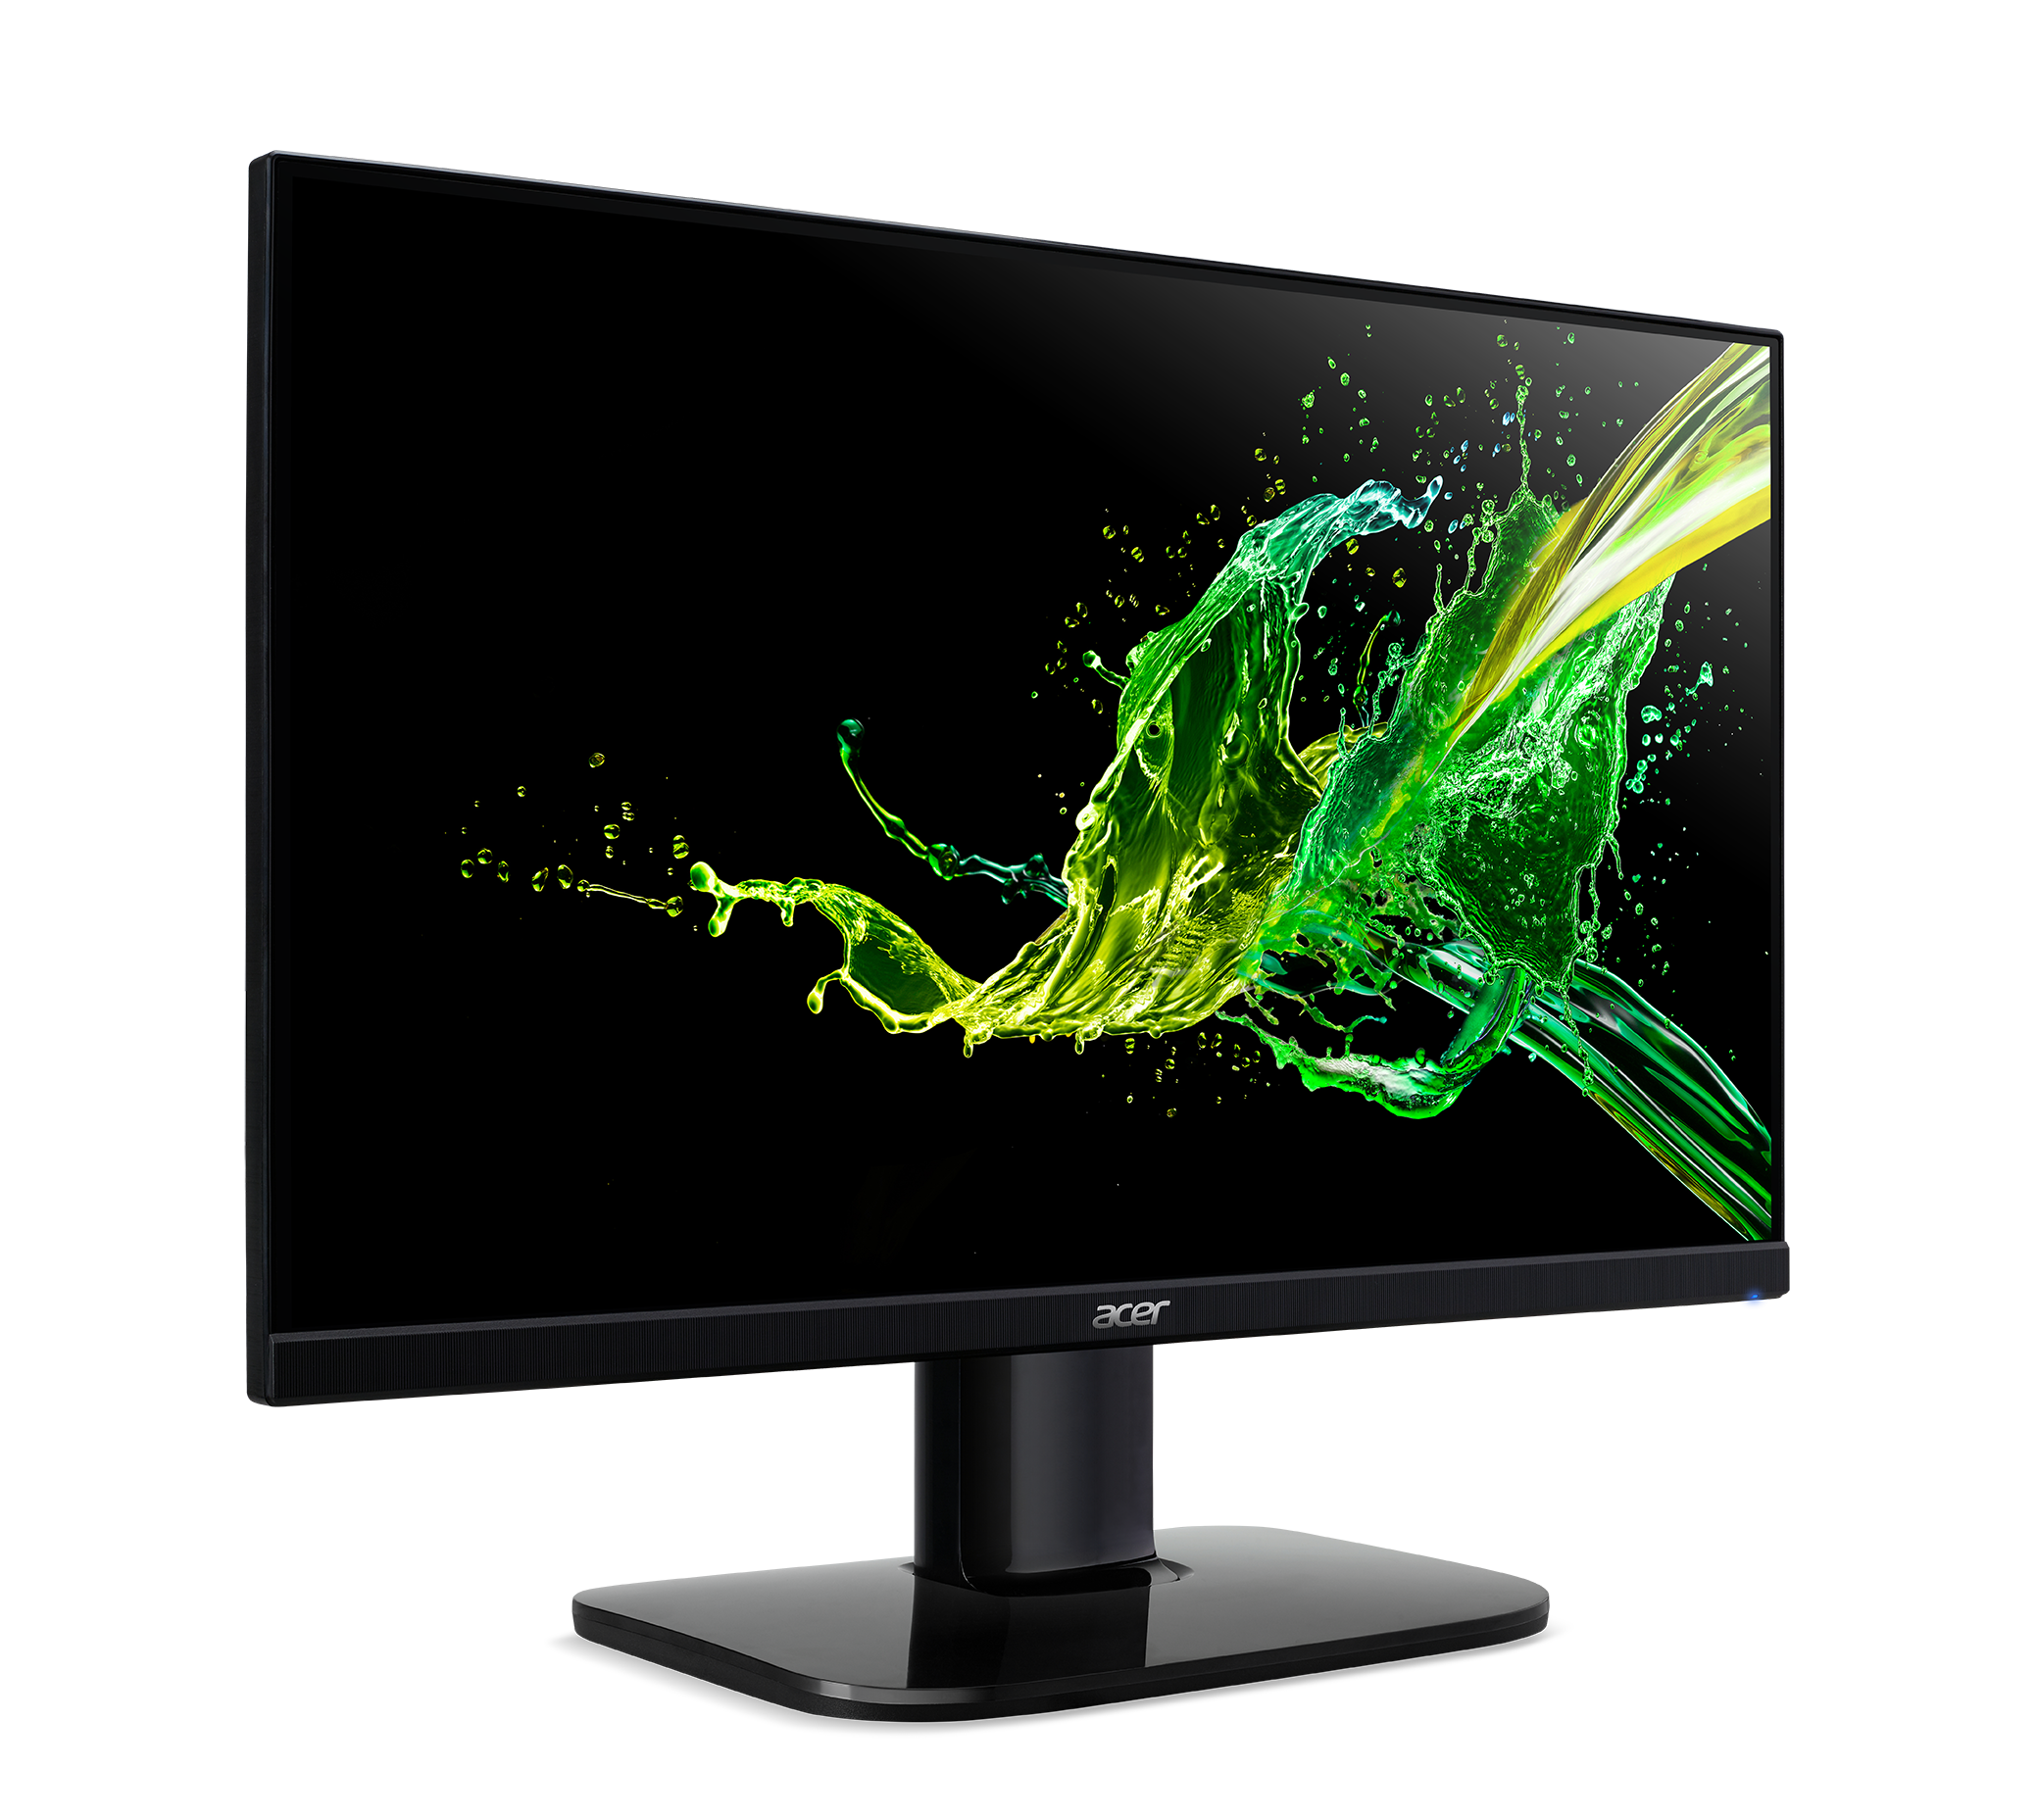 Acer KW272U bmiipx 27” WQHD 2560 x 1440 IPS Monitor with 75Hz Refresh Rate with AMD RADEON FreeSync Technology (Display Port & 2 x HDMI 1.4 Ports) - image 2 of 6